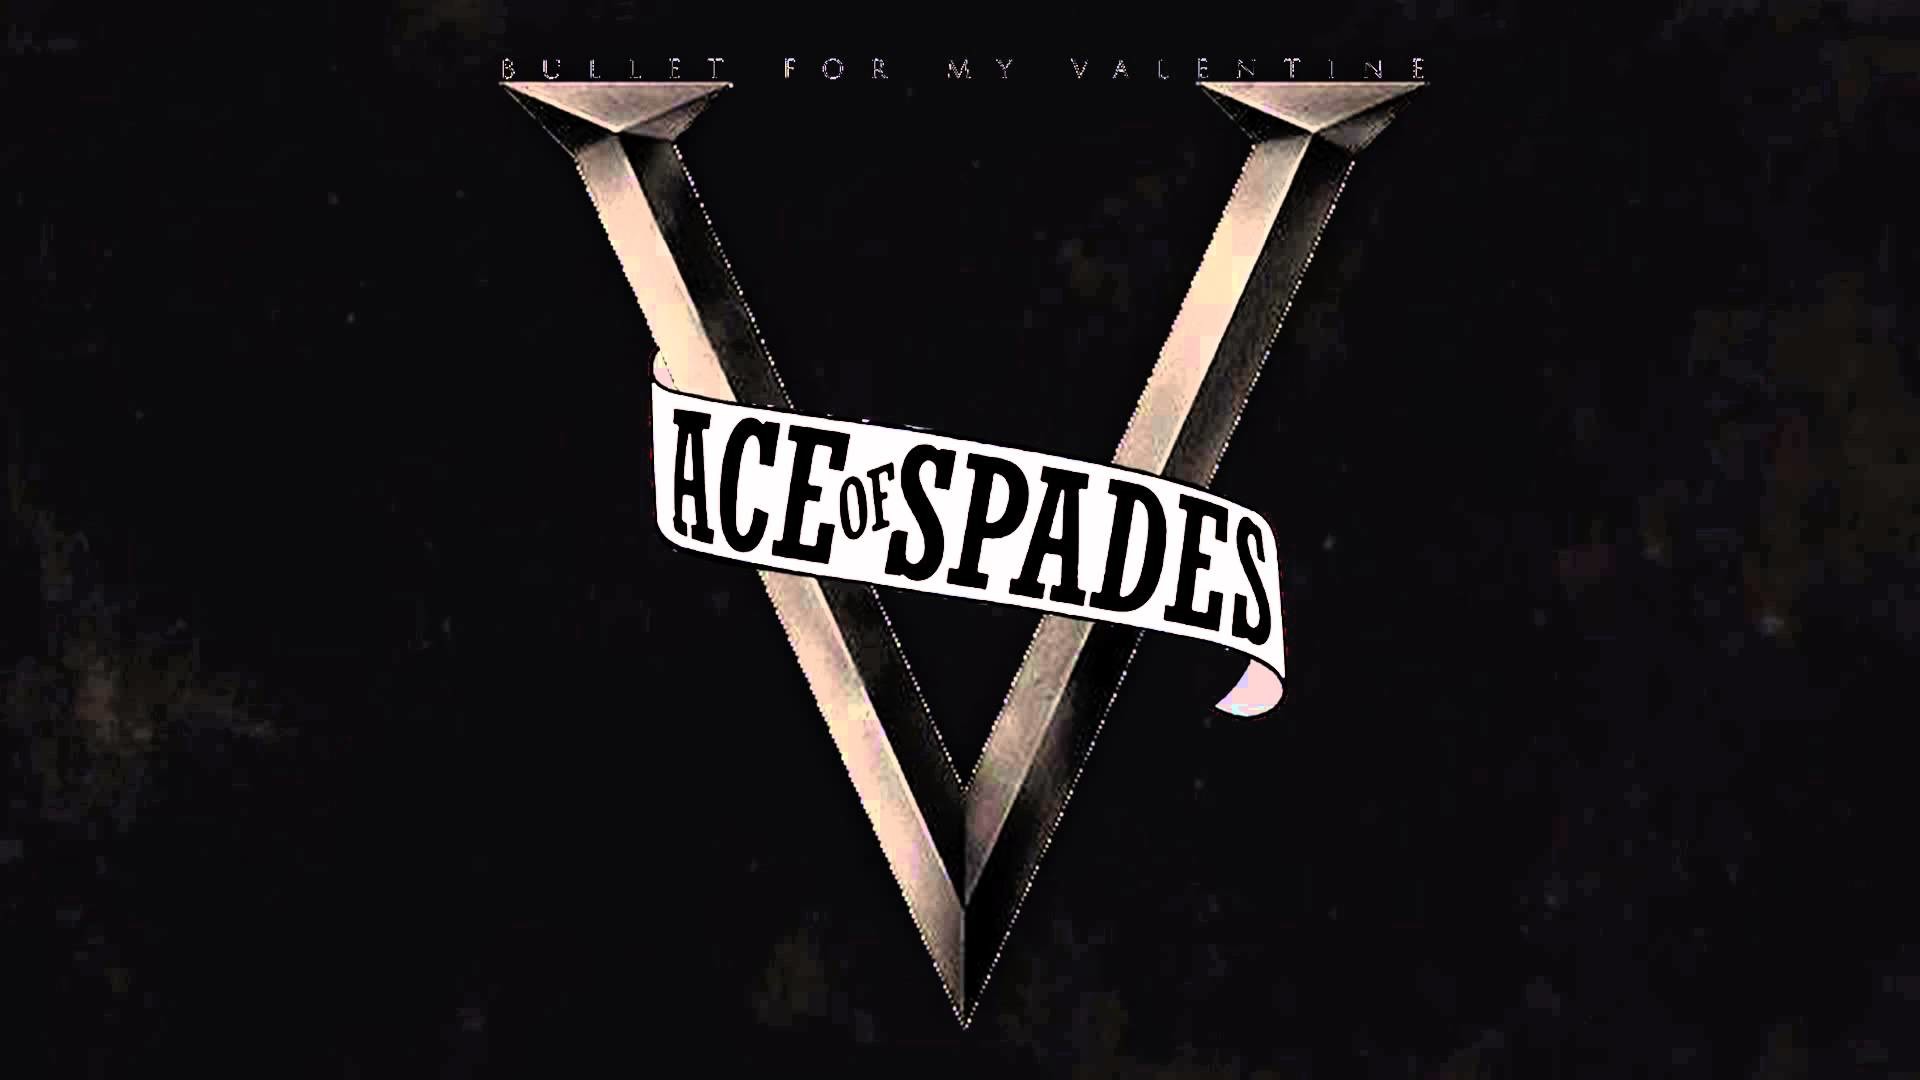 1920x1080 iRock: "Ace of Spades" (Bullet for My Valentine)